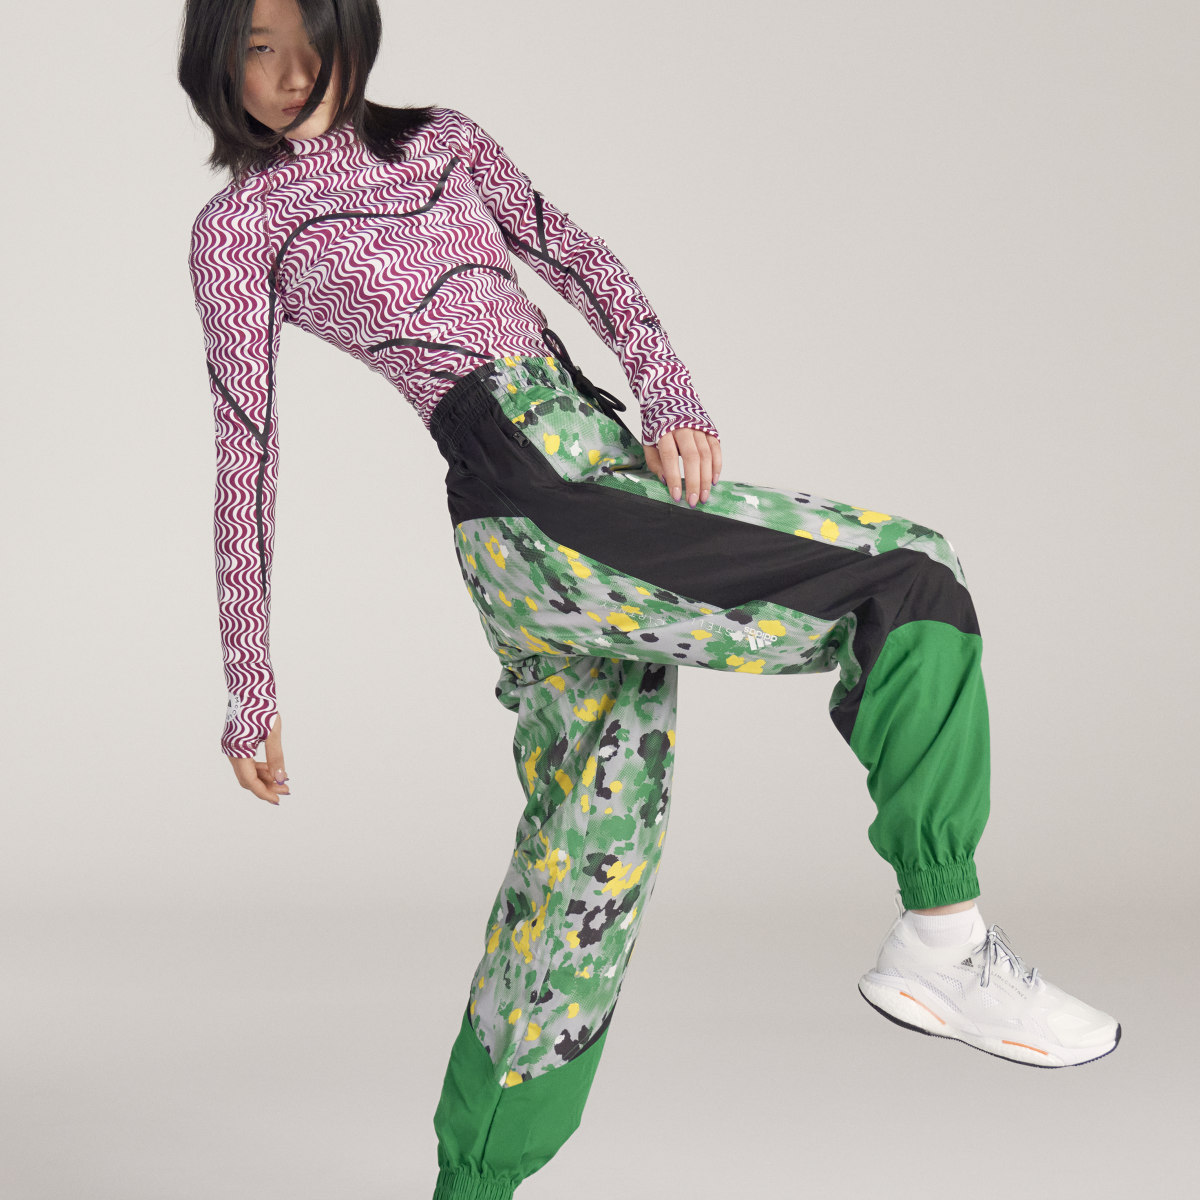 Adidas by Stella McCartney Printed Woven Tracksuit Bottoms. 6